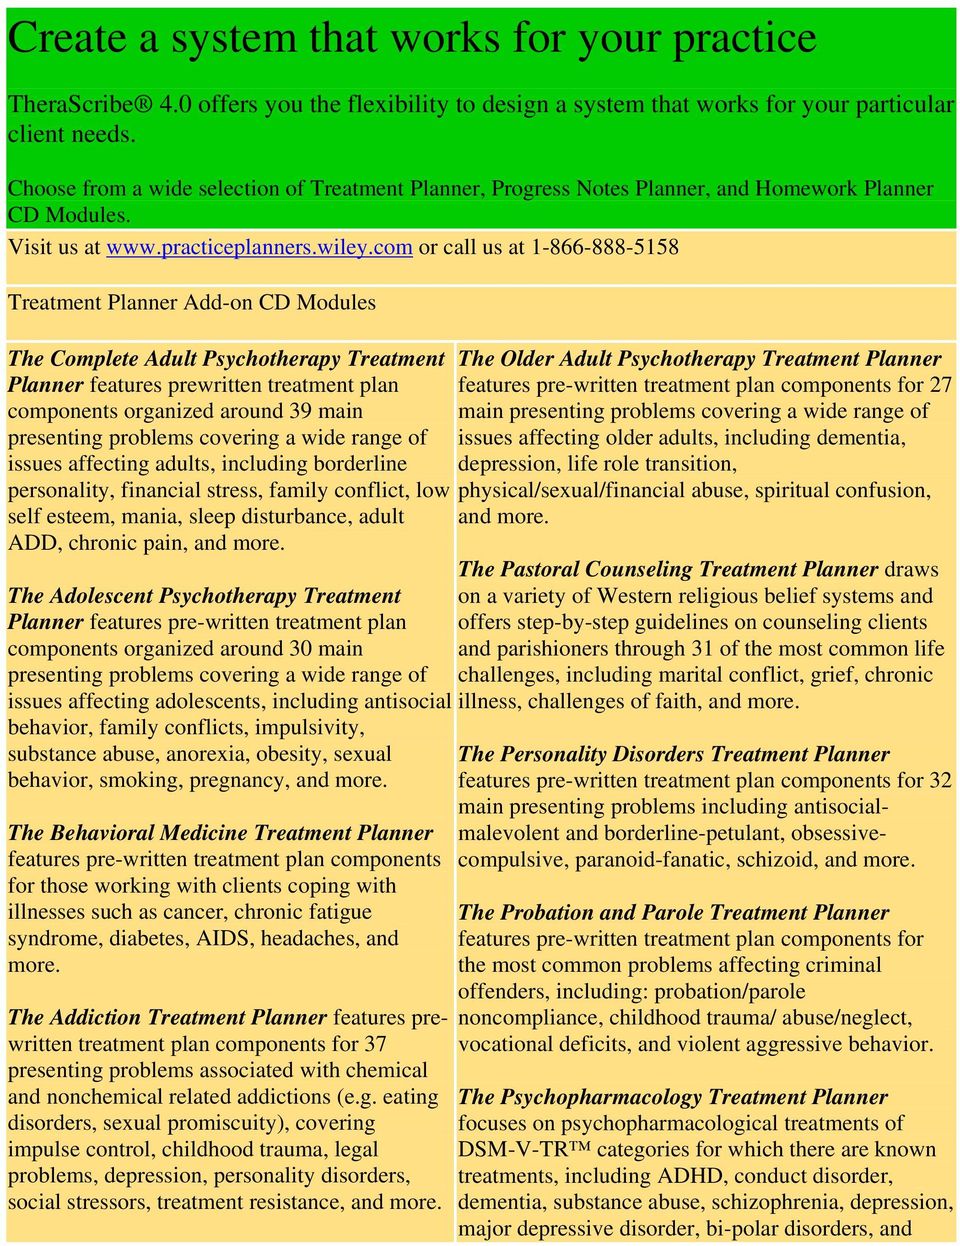 com or call us at 1-866-888-5158 Treatment Planner Add-on CD Modules The Complete Adult Psychotherapy Treatment components organized around 39 main presenting problems covering a wide range of issues